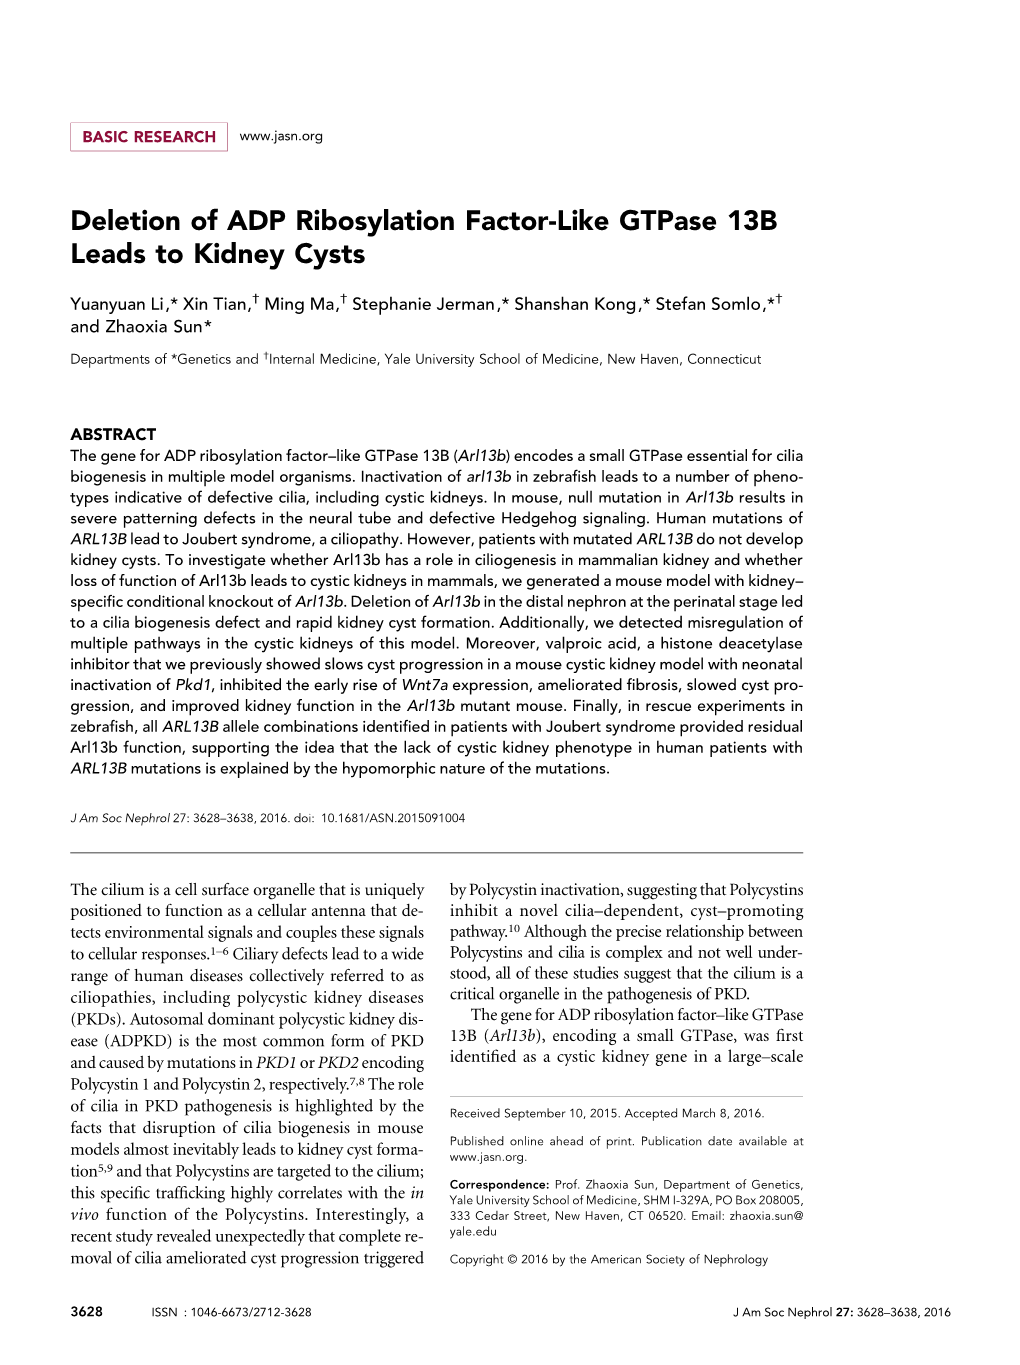 Deletion of ADP Ribosylation Factor-Like Gtpase 13B Leads to Kidney Cysts